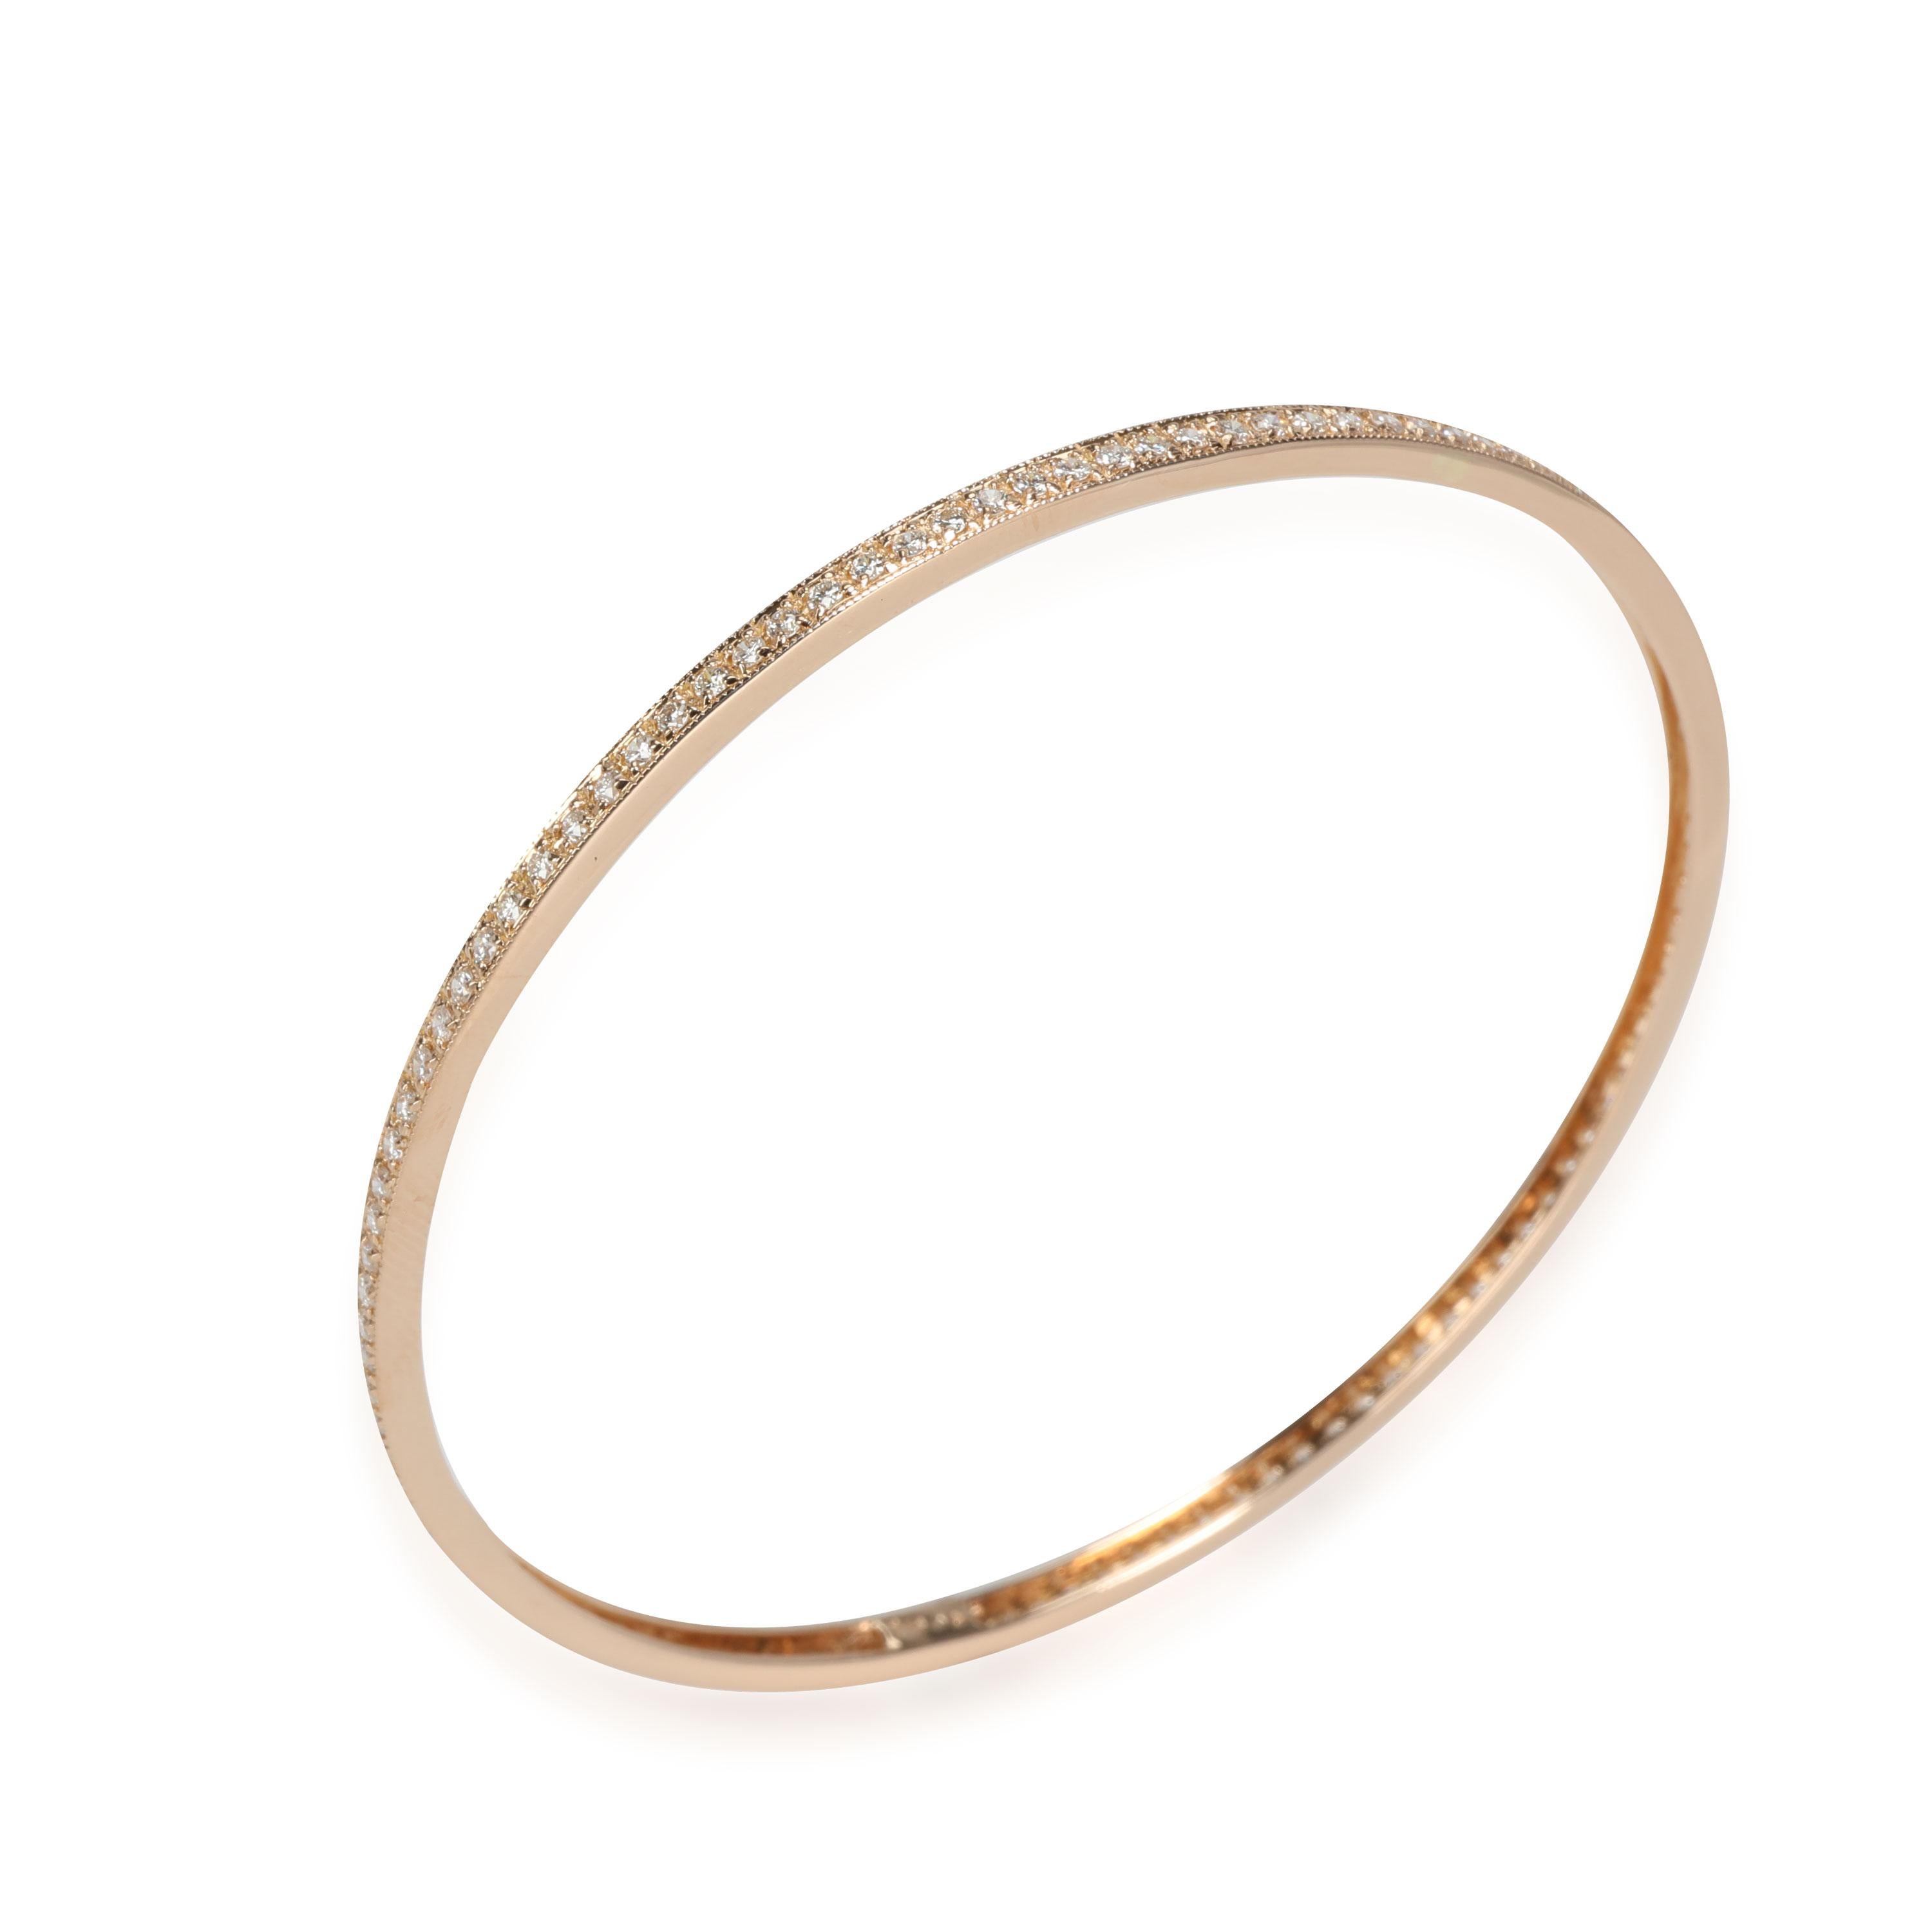 Diamond Bangle in 18k Rose Gold 1.75 CTW

PRIMARY DETAILS
SKU: 117287
Listing Title: Diamond Bangle in 18k Rose Gold 1.75 CTW
Condition Description: Retails for 2995 USD. In excellent condition and recently polished. Chain is 7.5 inches in